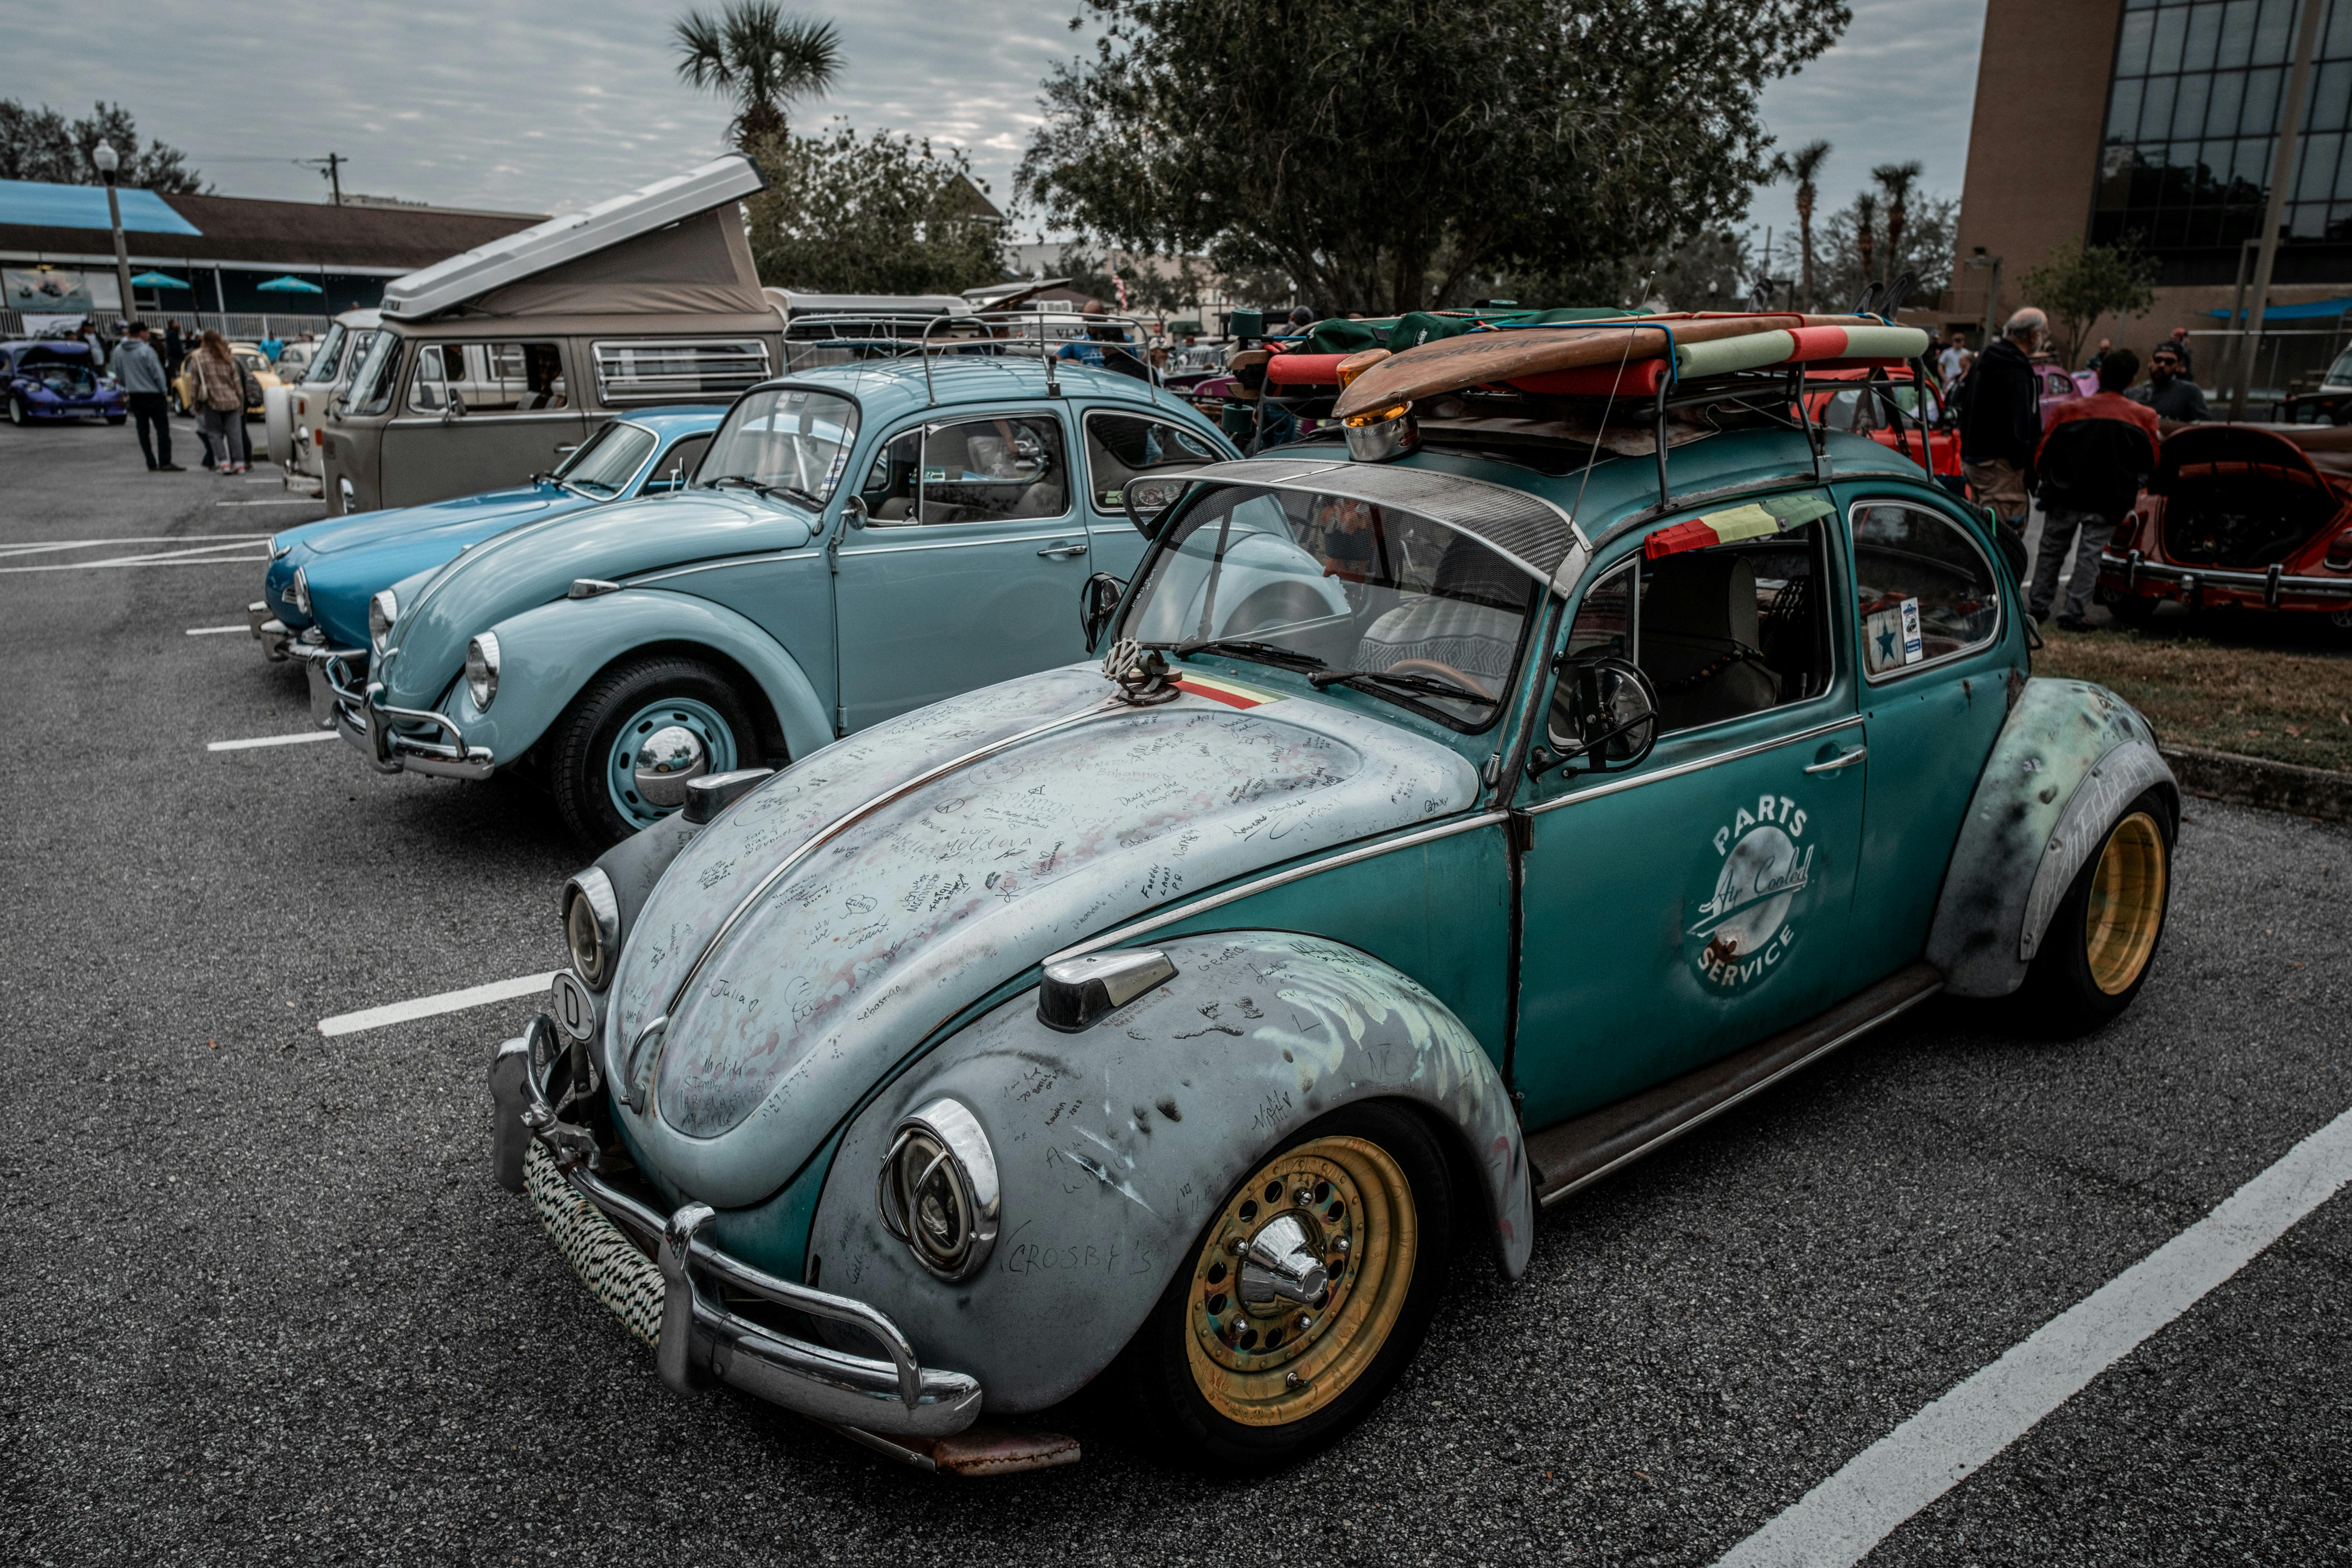 surfboard on the roof rack of a visually modified classic volkswagen beetle